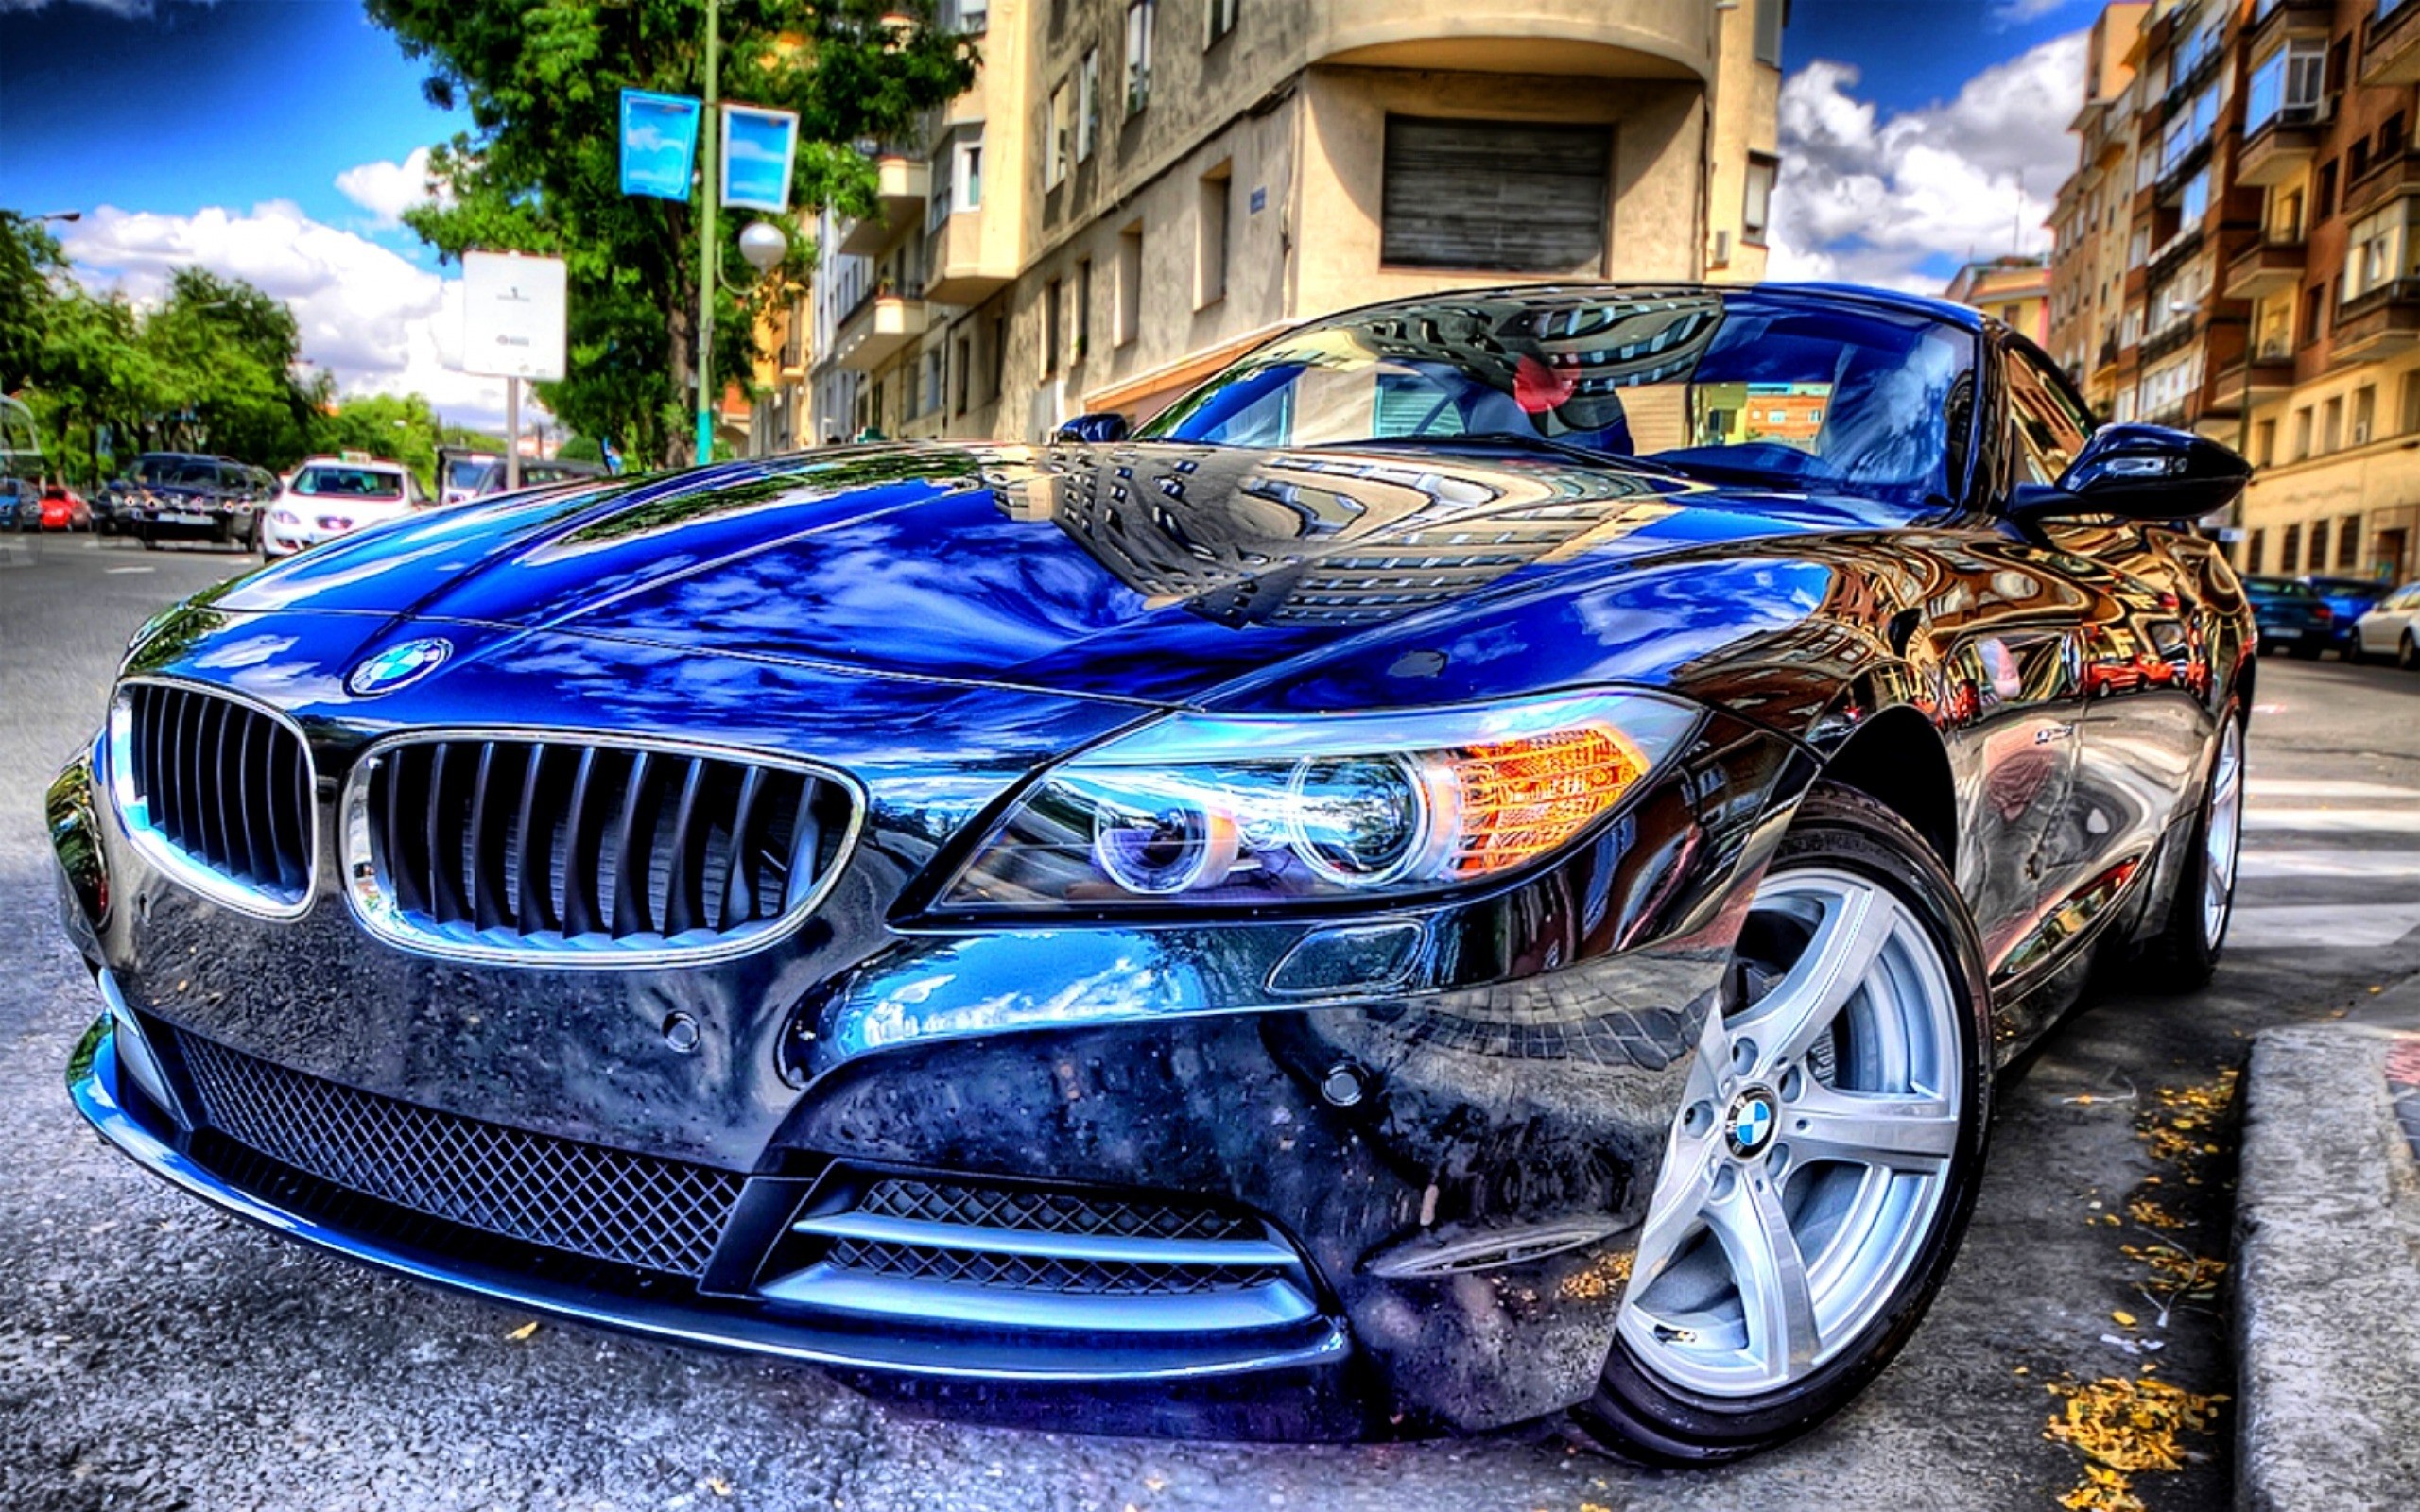 General 2560x1600 BMW tonemapping HDR car blue cars BMW Z4 vehicle closeup frontal view building sky clouds road